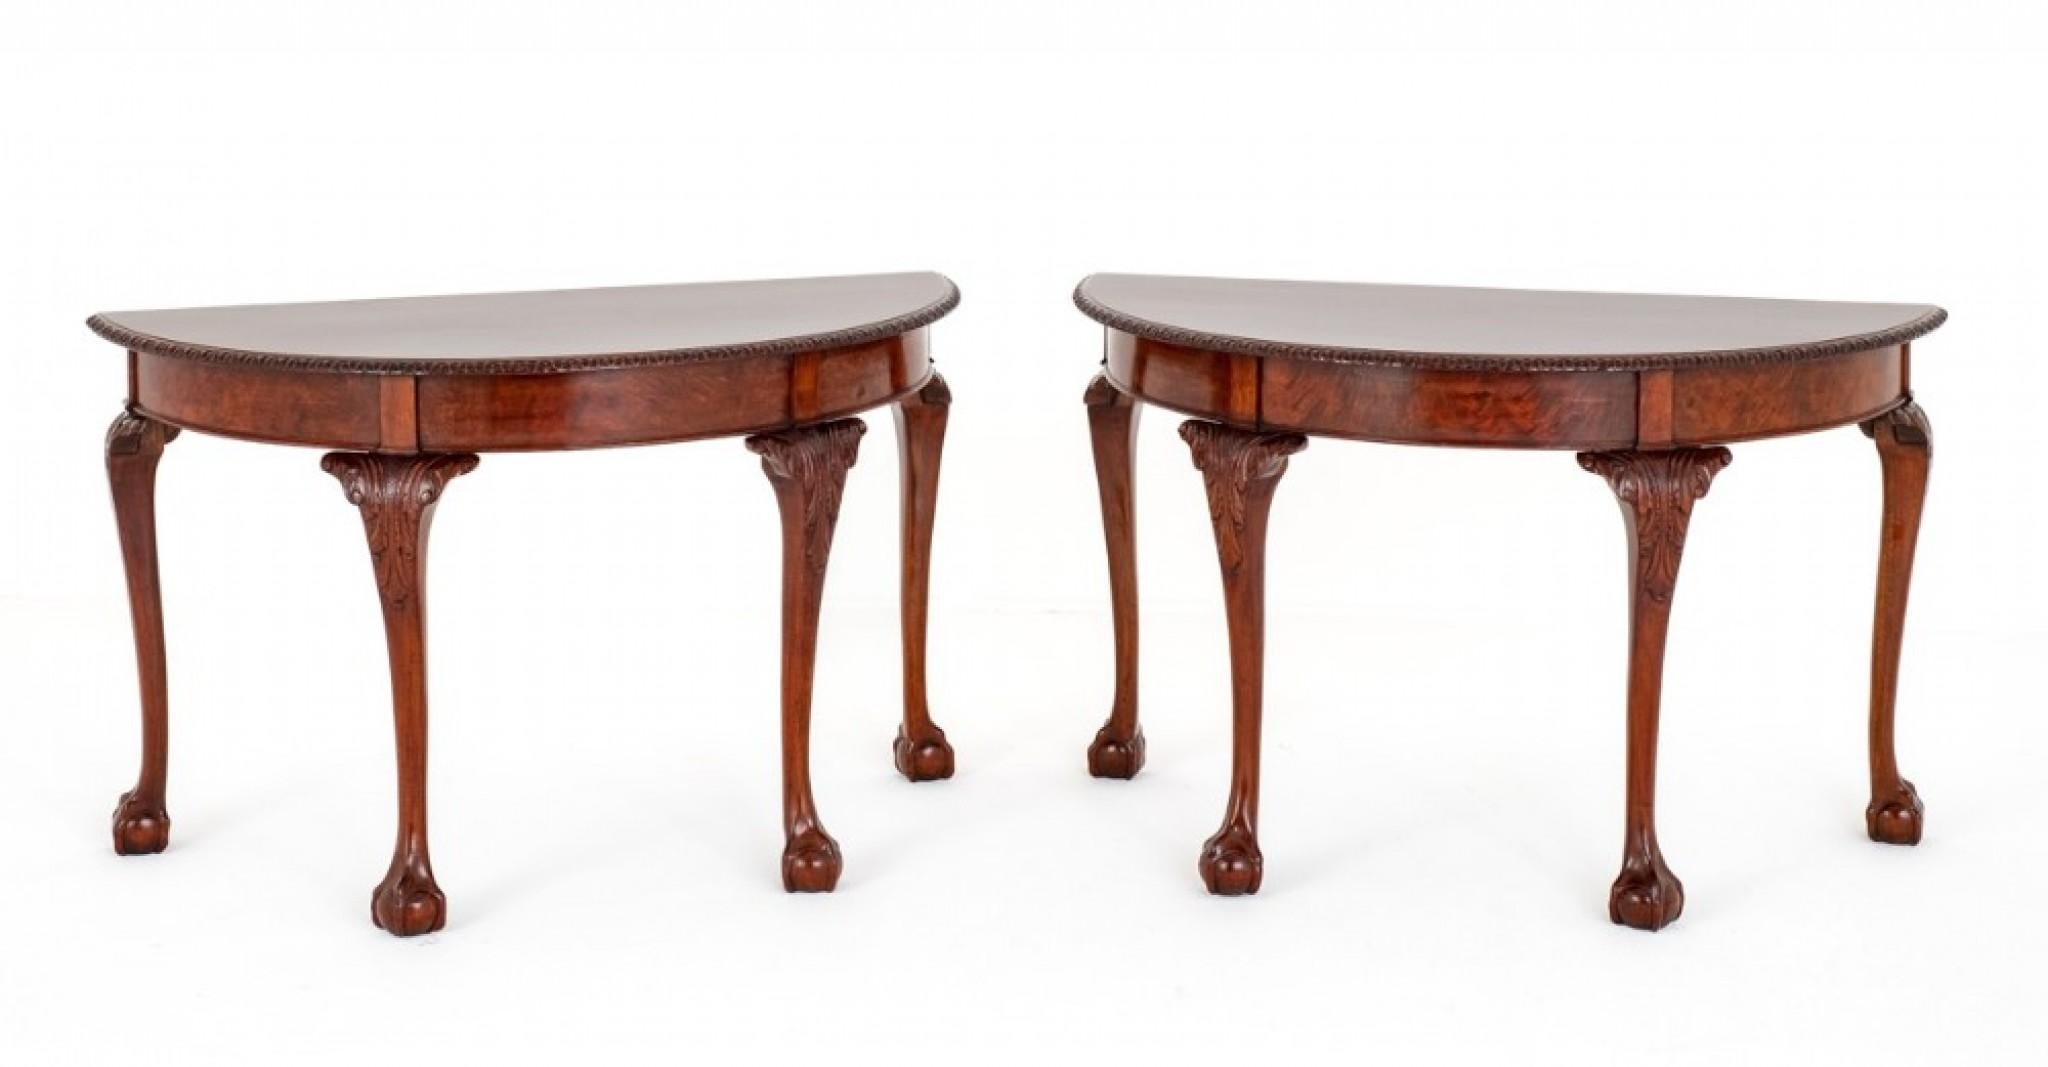 Pair of Mahogany Chippendale Style Console Tables.
These Console Tables are Raised Upon Cabriole Legs with Boldly Carved Ball and Claw Feet and Carved Decoration to the Knees.
The Demi Lune Shaped Tops also Having Carved Decoration.
Presented in